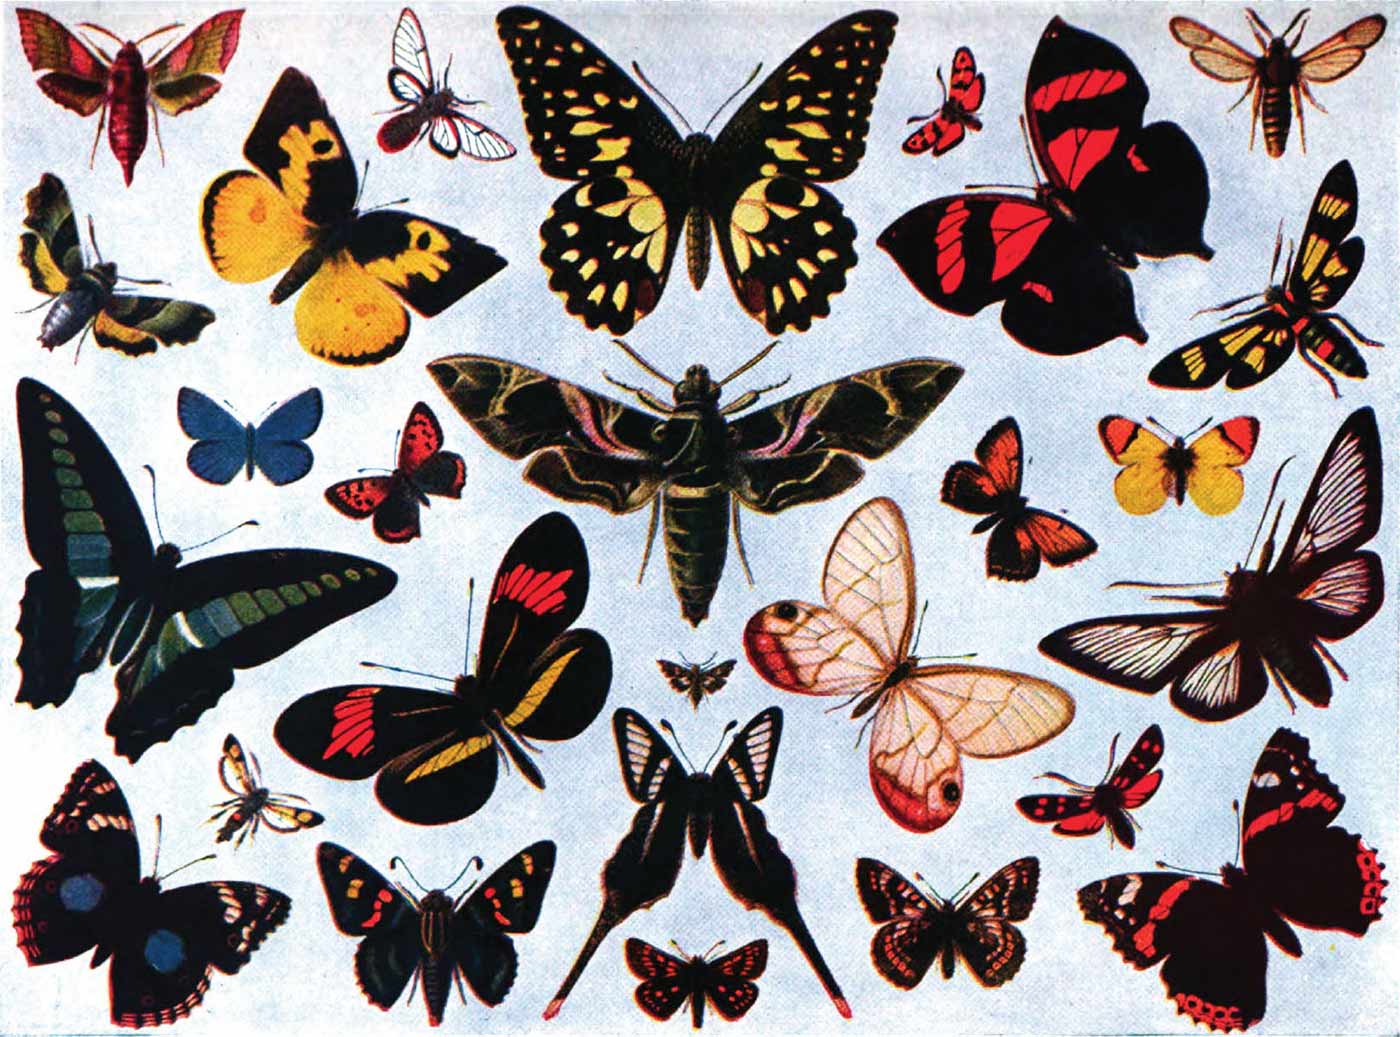 "The Encyclopedia Americana" color montage of a variety of unidentified butterflies and moths, 1920.